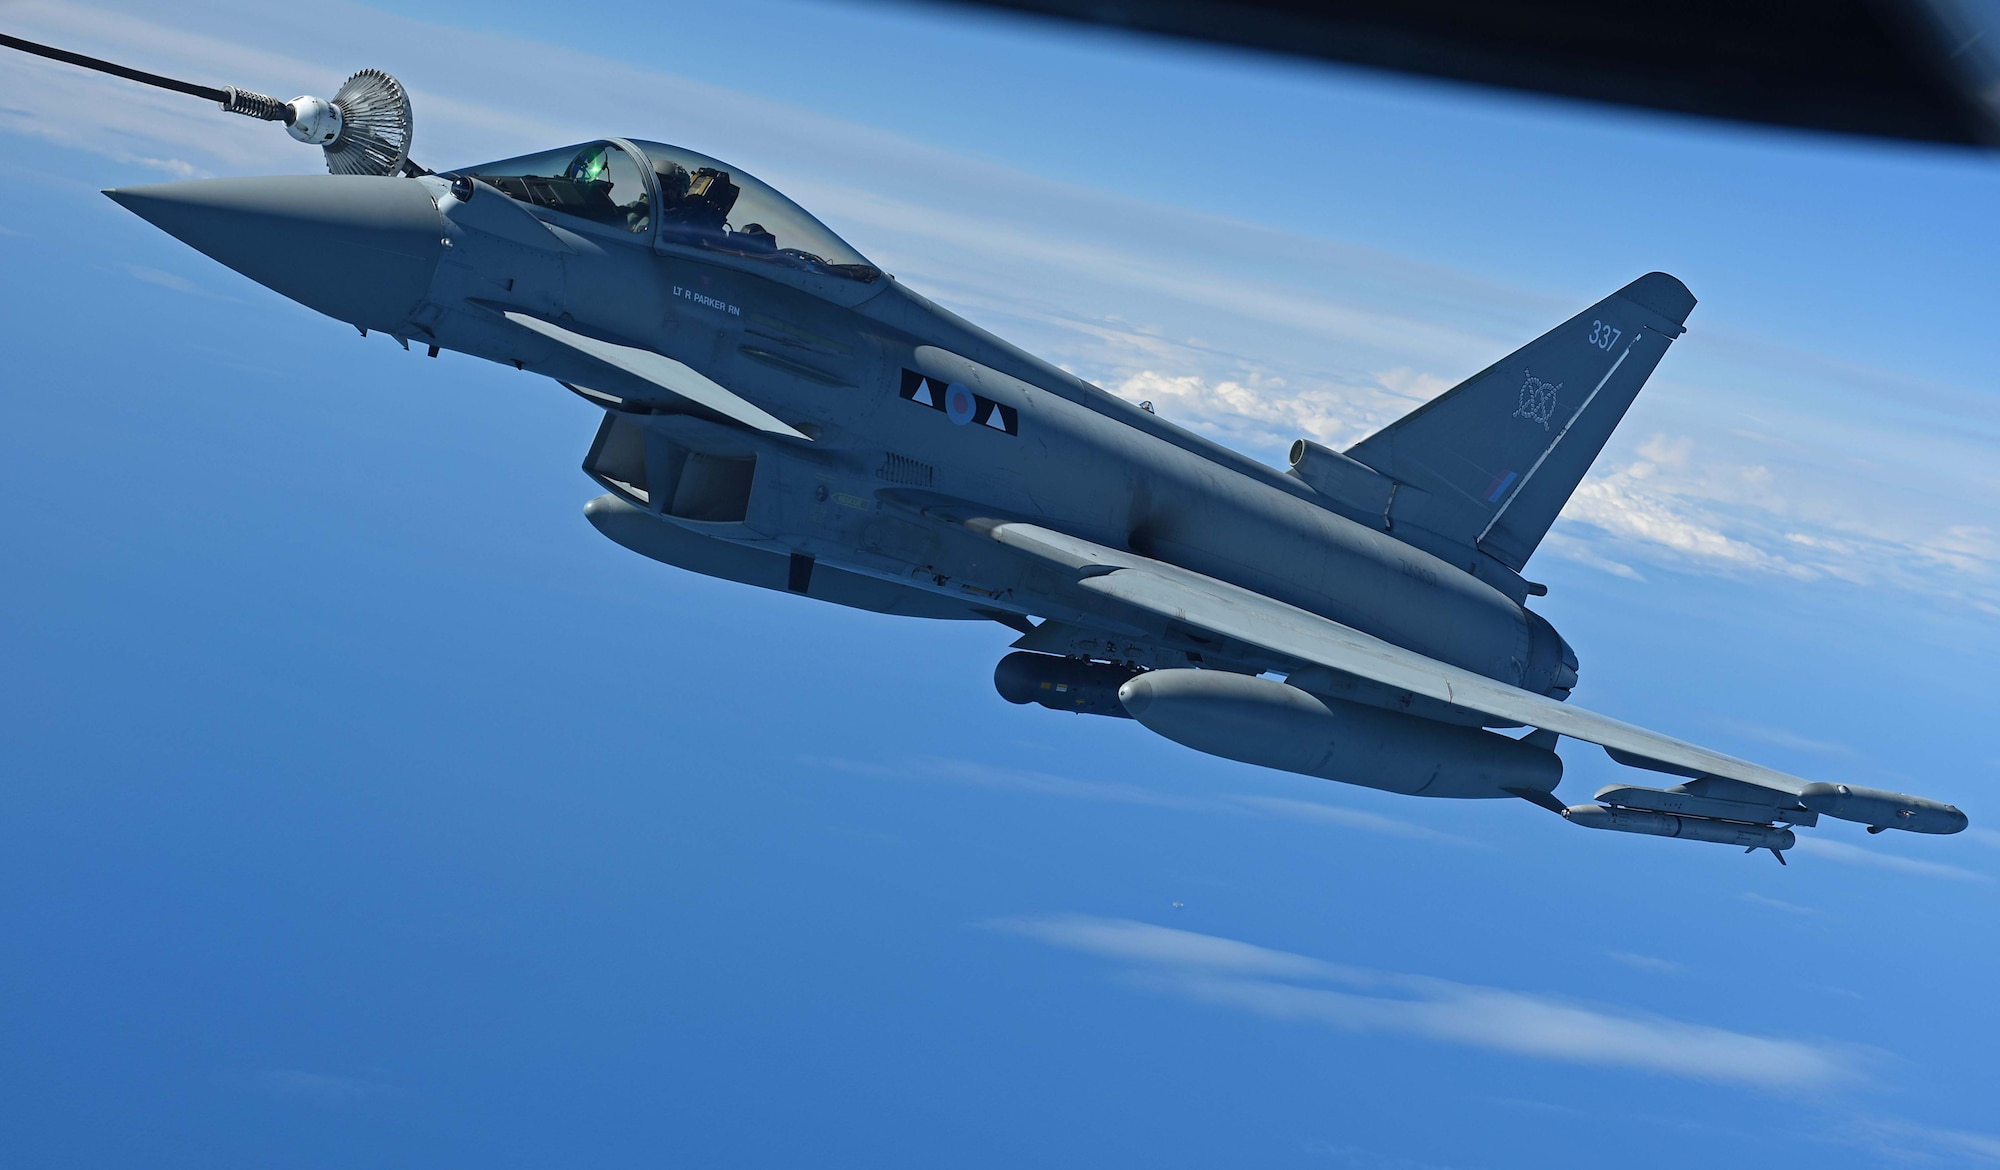 A Royal Air Force Typhoon receives fuel from a U.S. Air Force KC-135 Stratotanker during the U.K.-led Exercise Joint Warrior over England, April 25, 2018. The KC-135 offloaded more than 7,000 pounds of fuel in support of the exercise that involved U.K., NATO and allied units. (U.S. Air Force photo by Senior Airman Luke Milano)